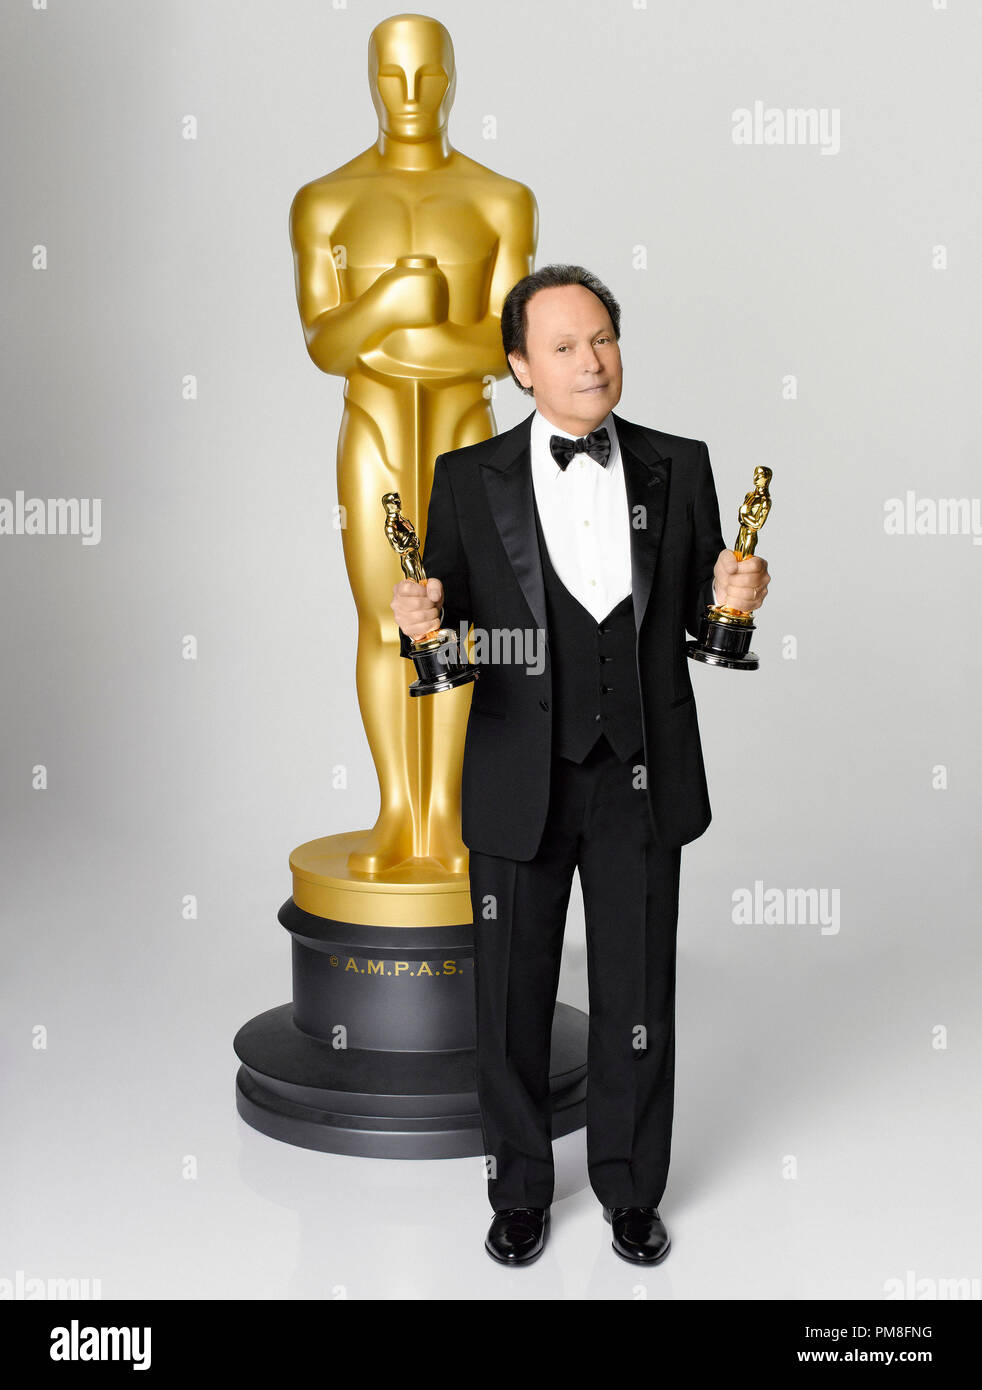 THE 84TH ACADEMY AWARDS¨ - Billy Crystal serves as host for the 84th Academy Awards, which will be presented on Sunday, February 26, 2012, at the Kodak Theatre at Hollywood & Highland Center¨, and televised live by the ABC Television Network. (ABC/BOB D'AMICO) Stock Photo